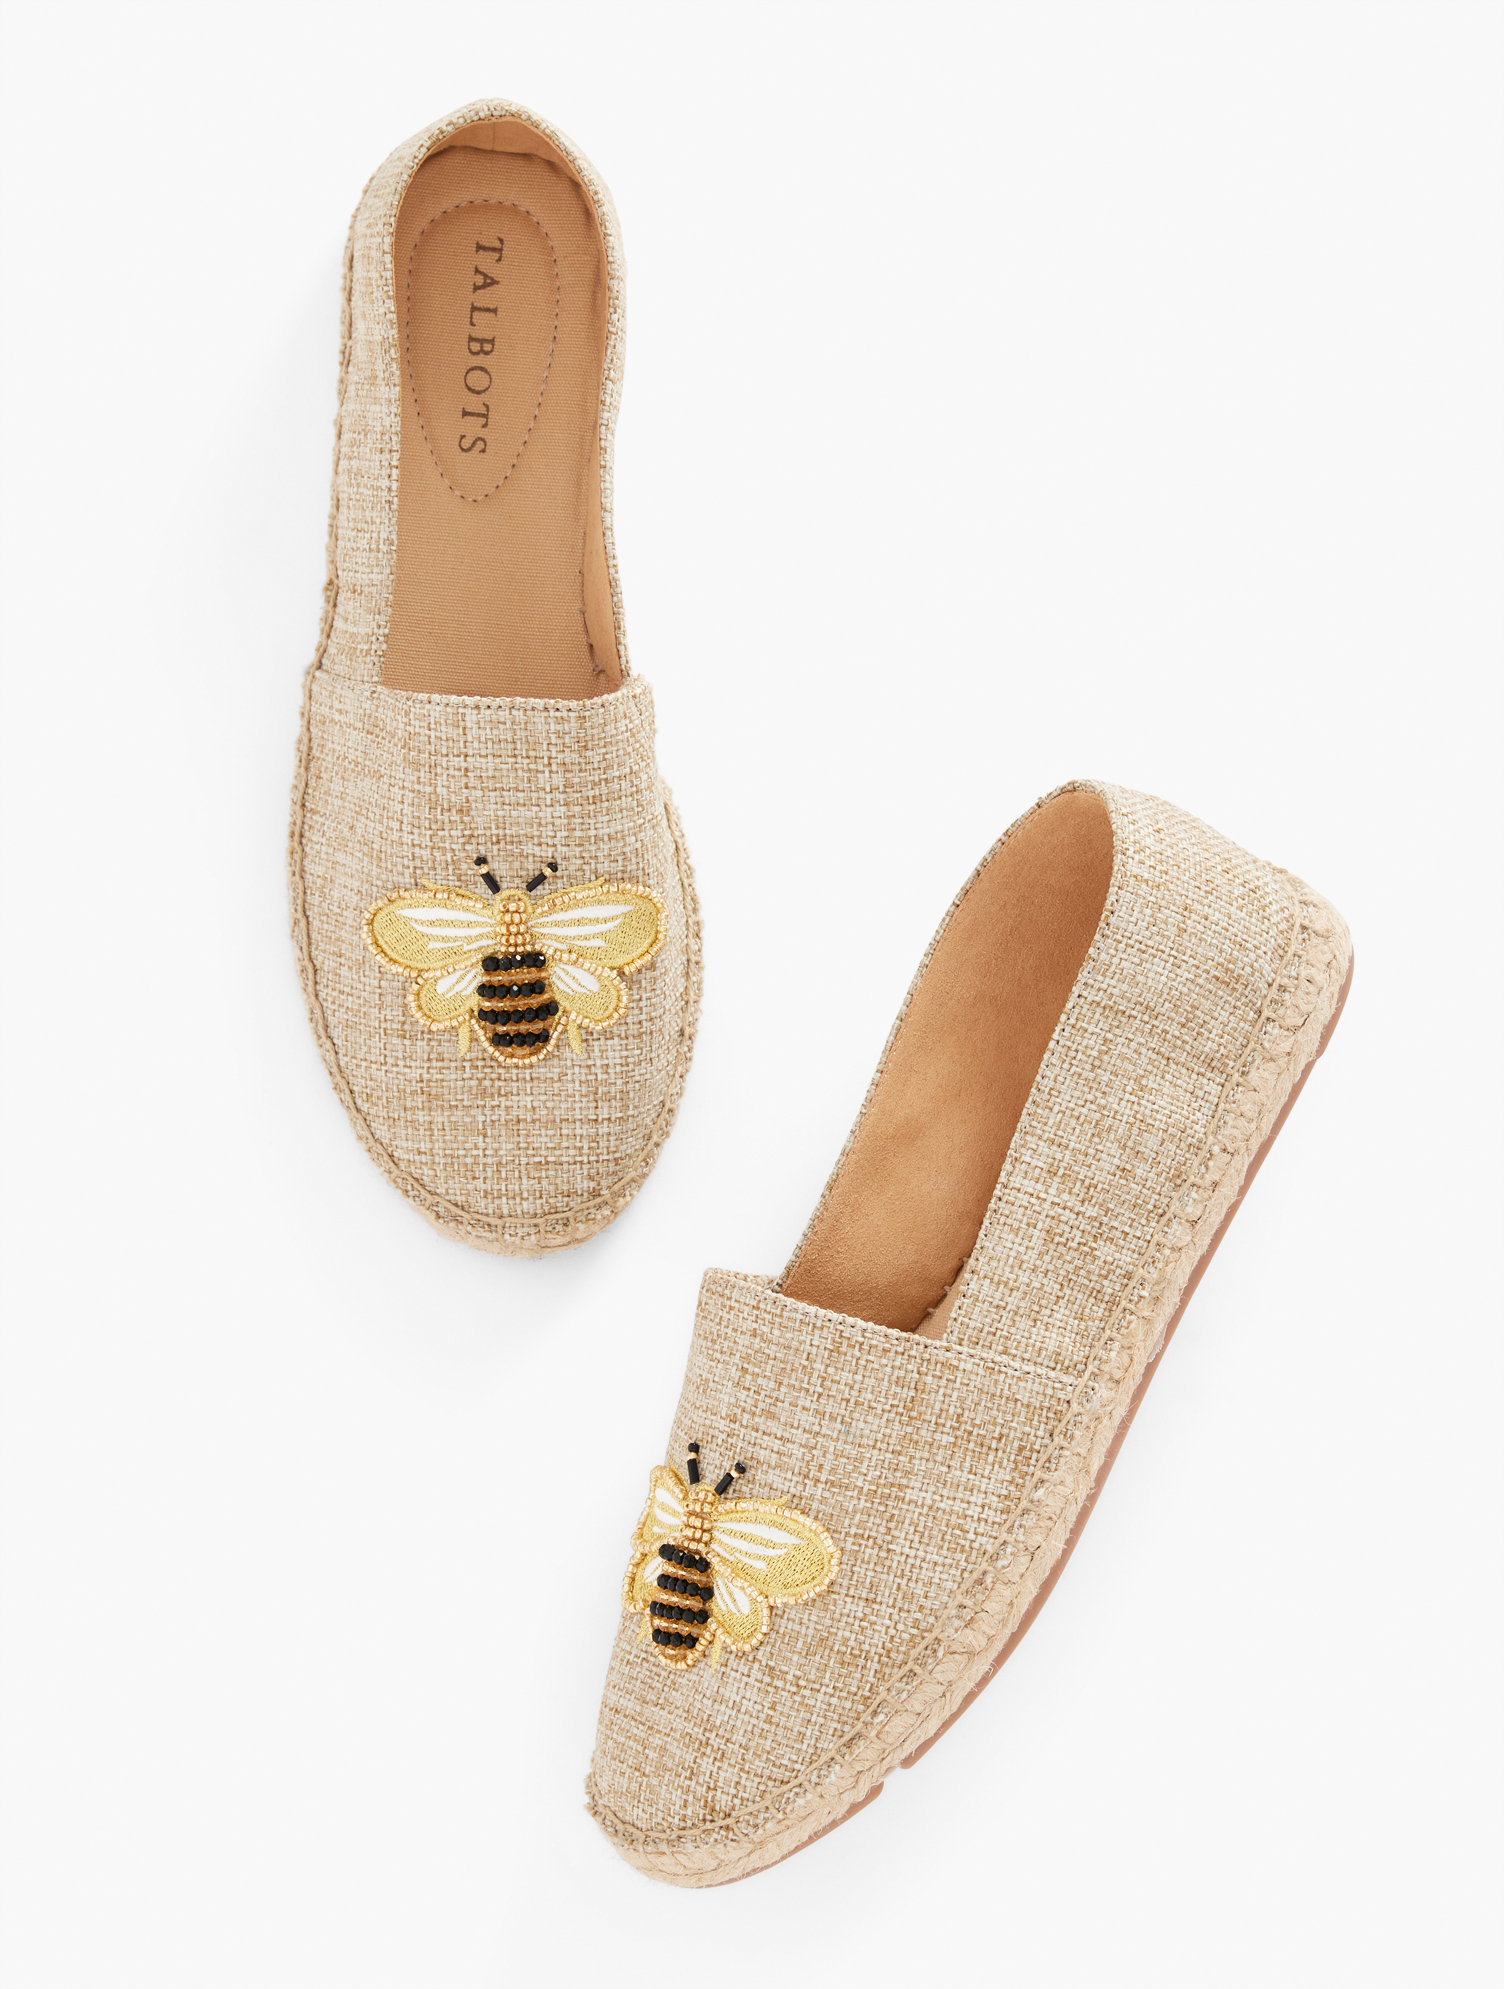 Talbots Izzy Espadrille Flats - Beaded Bee - Natural - 10m - 100% Cotton